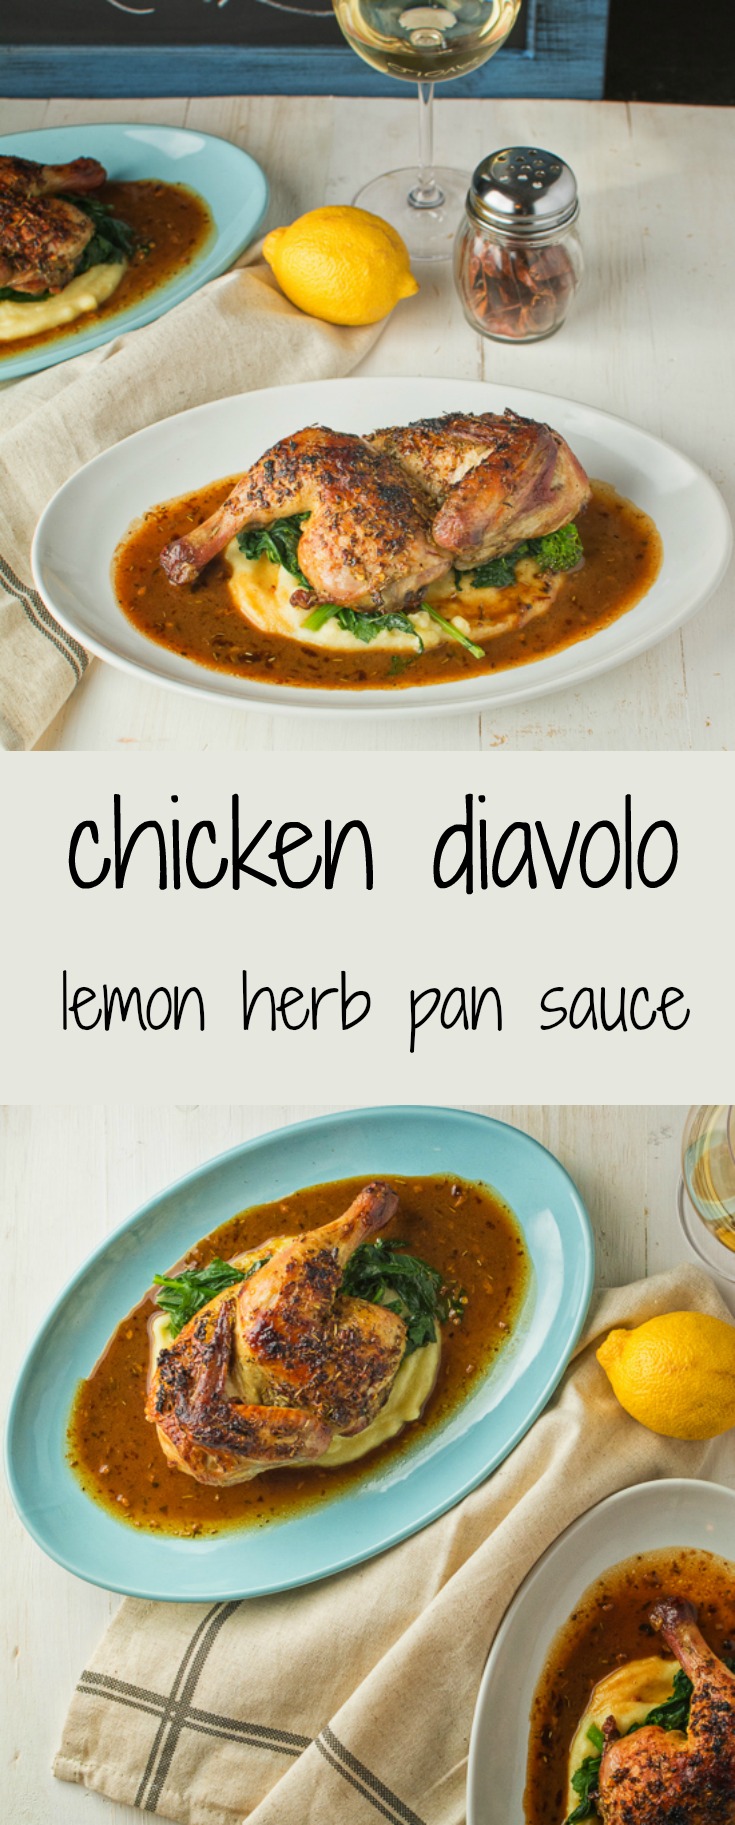 Chicken diavolo is garlicky, lemony and big on herbs. 